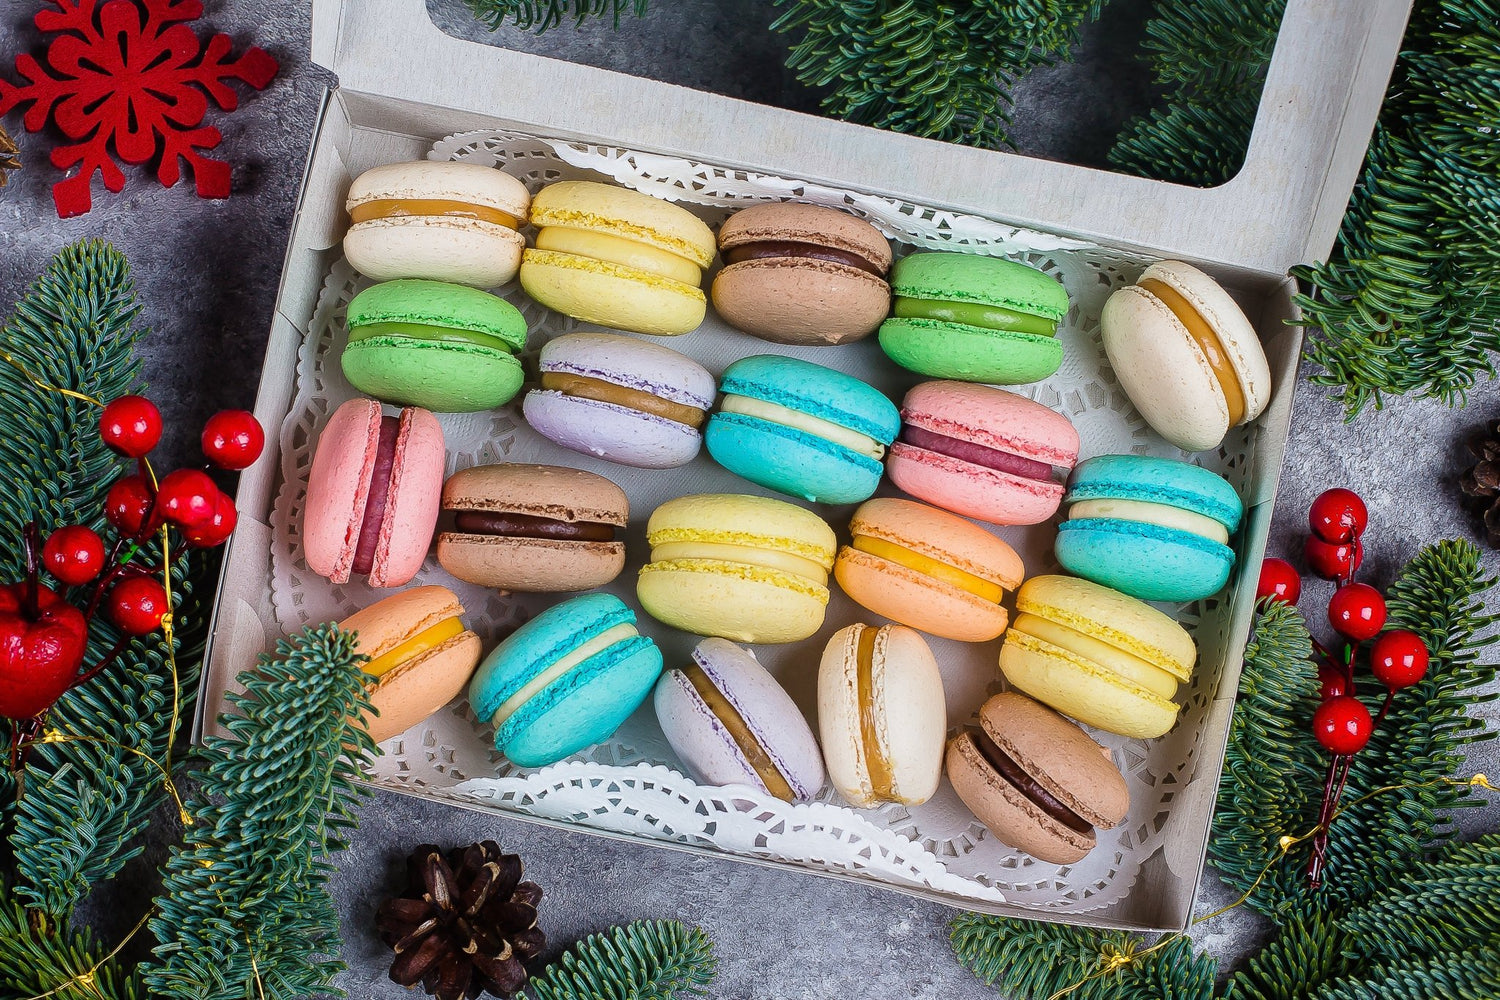 Product Spotlight - Macaron Boxes - PackQueen